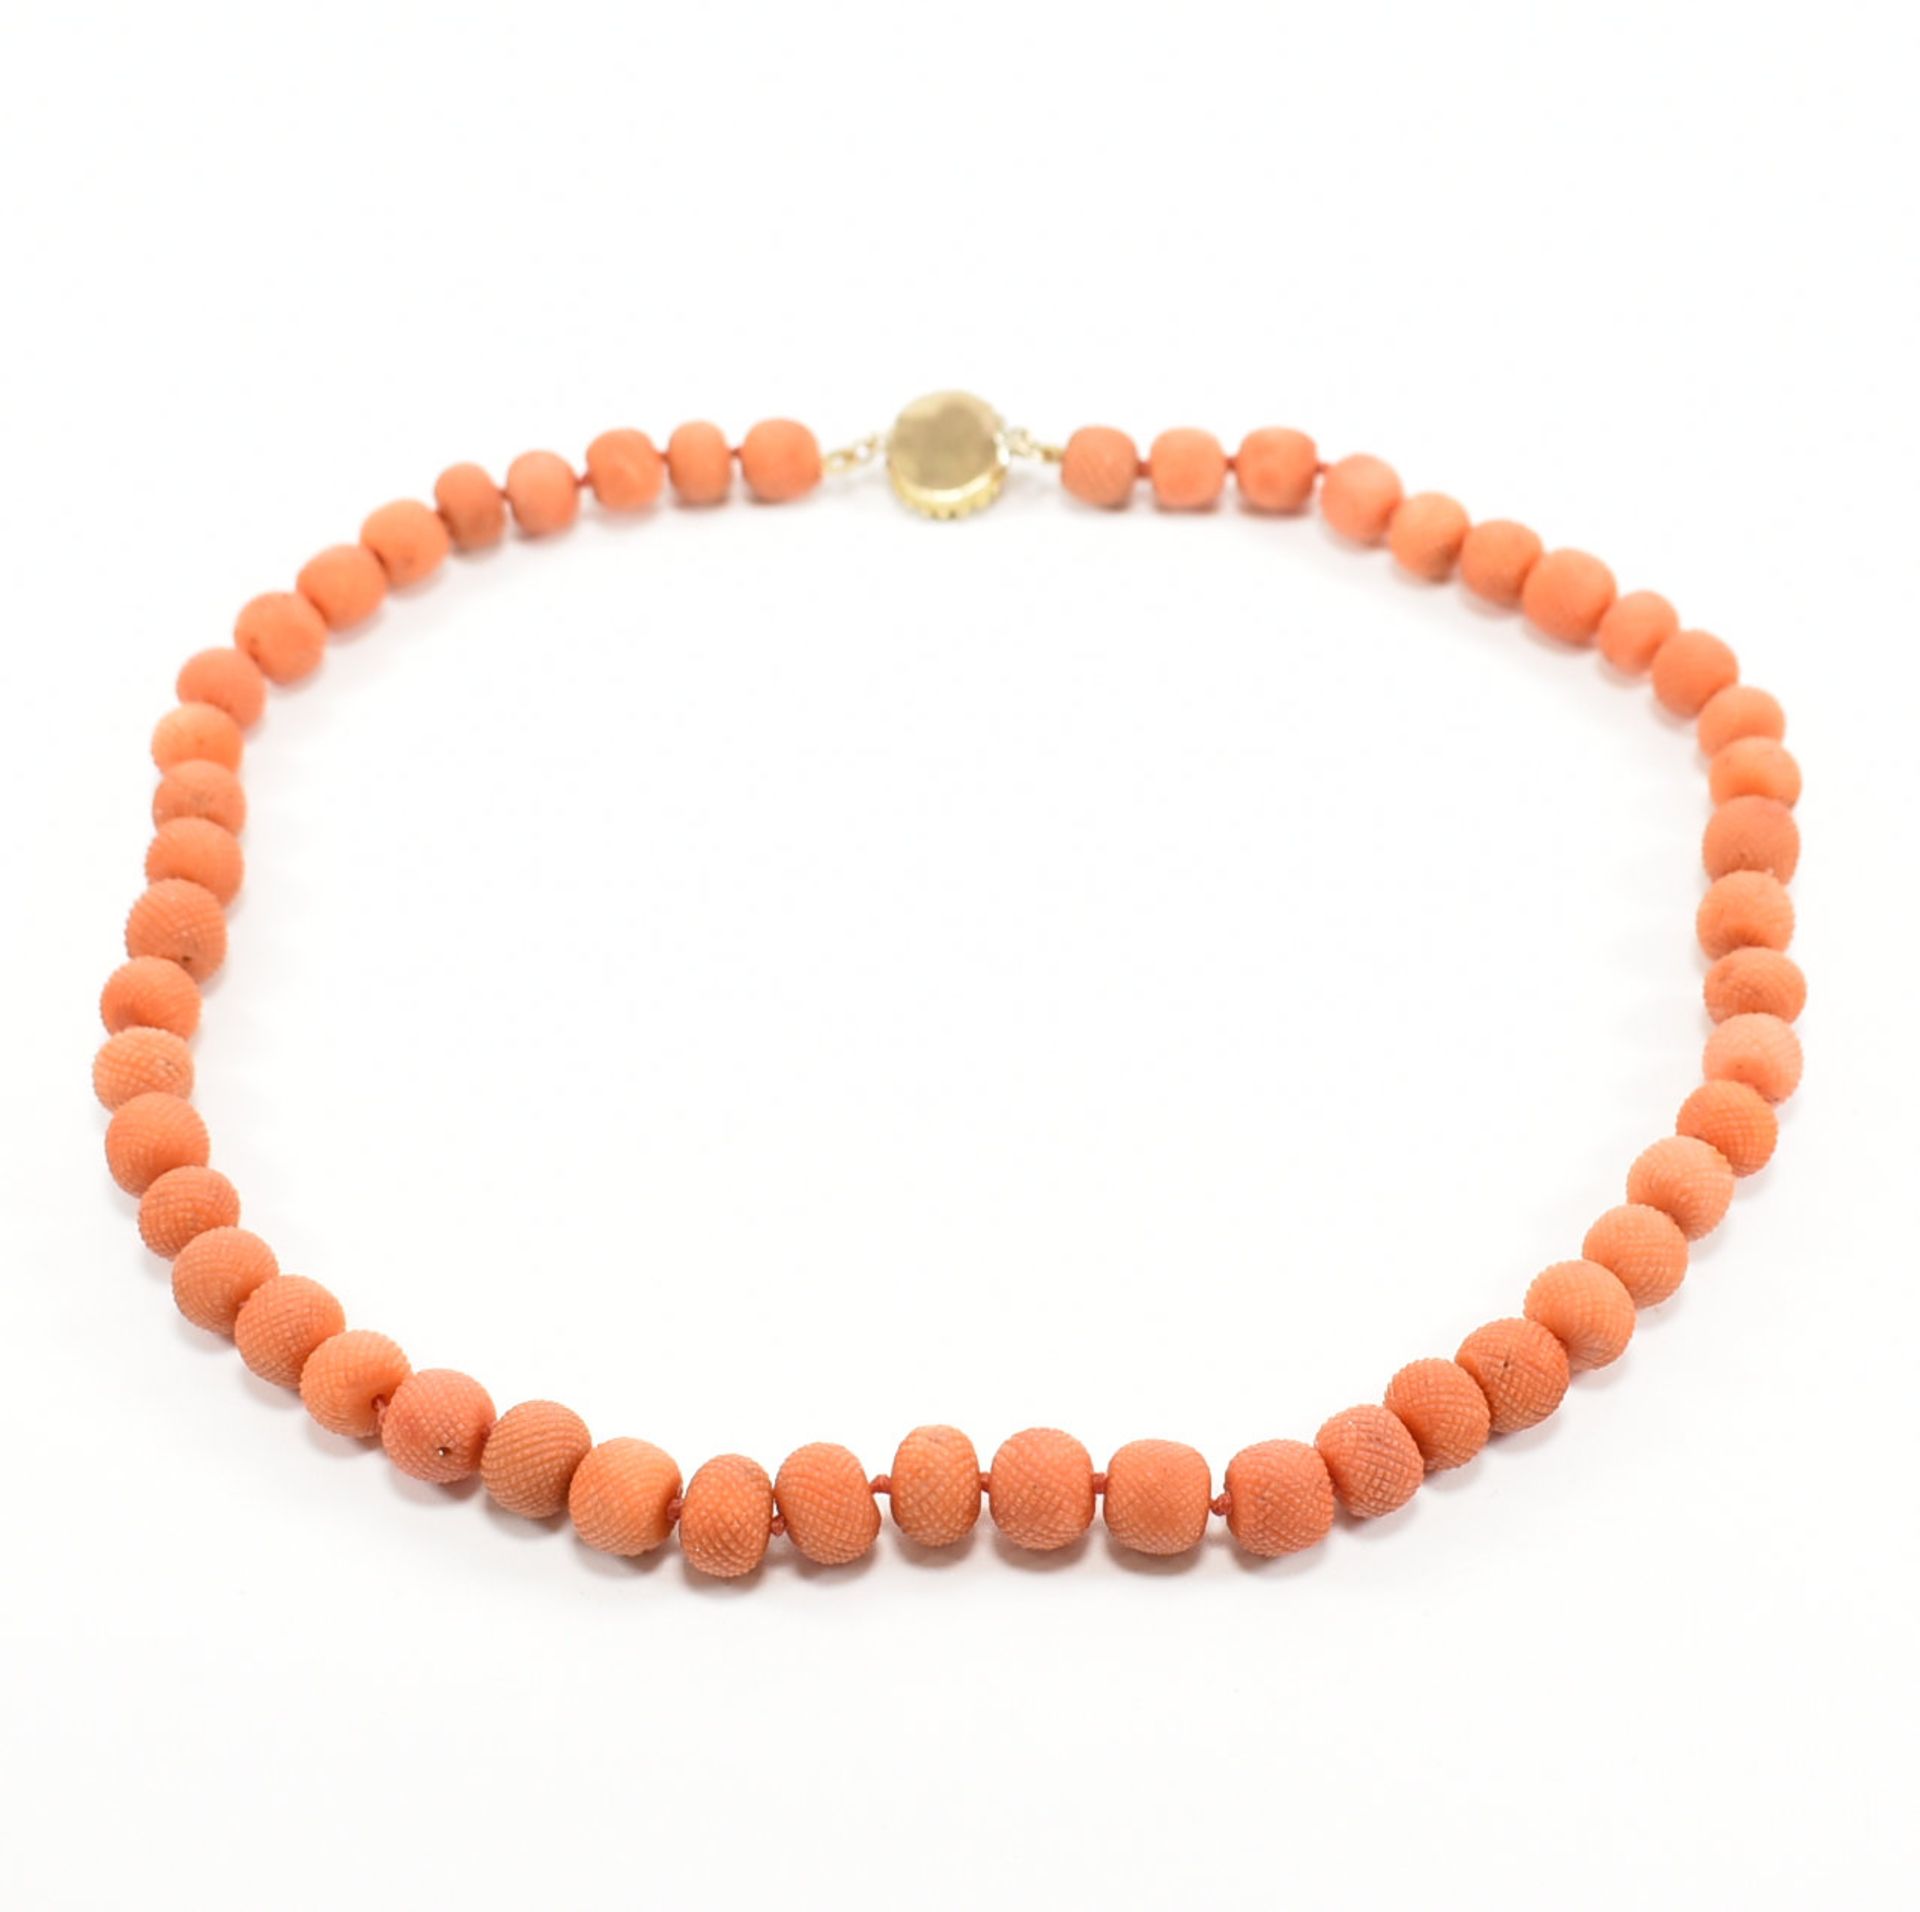 GEORGIAN CORAL PINEAPPLE BEAD NECKLACE - Image 7 of 8